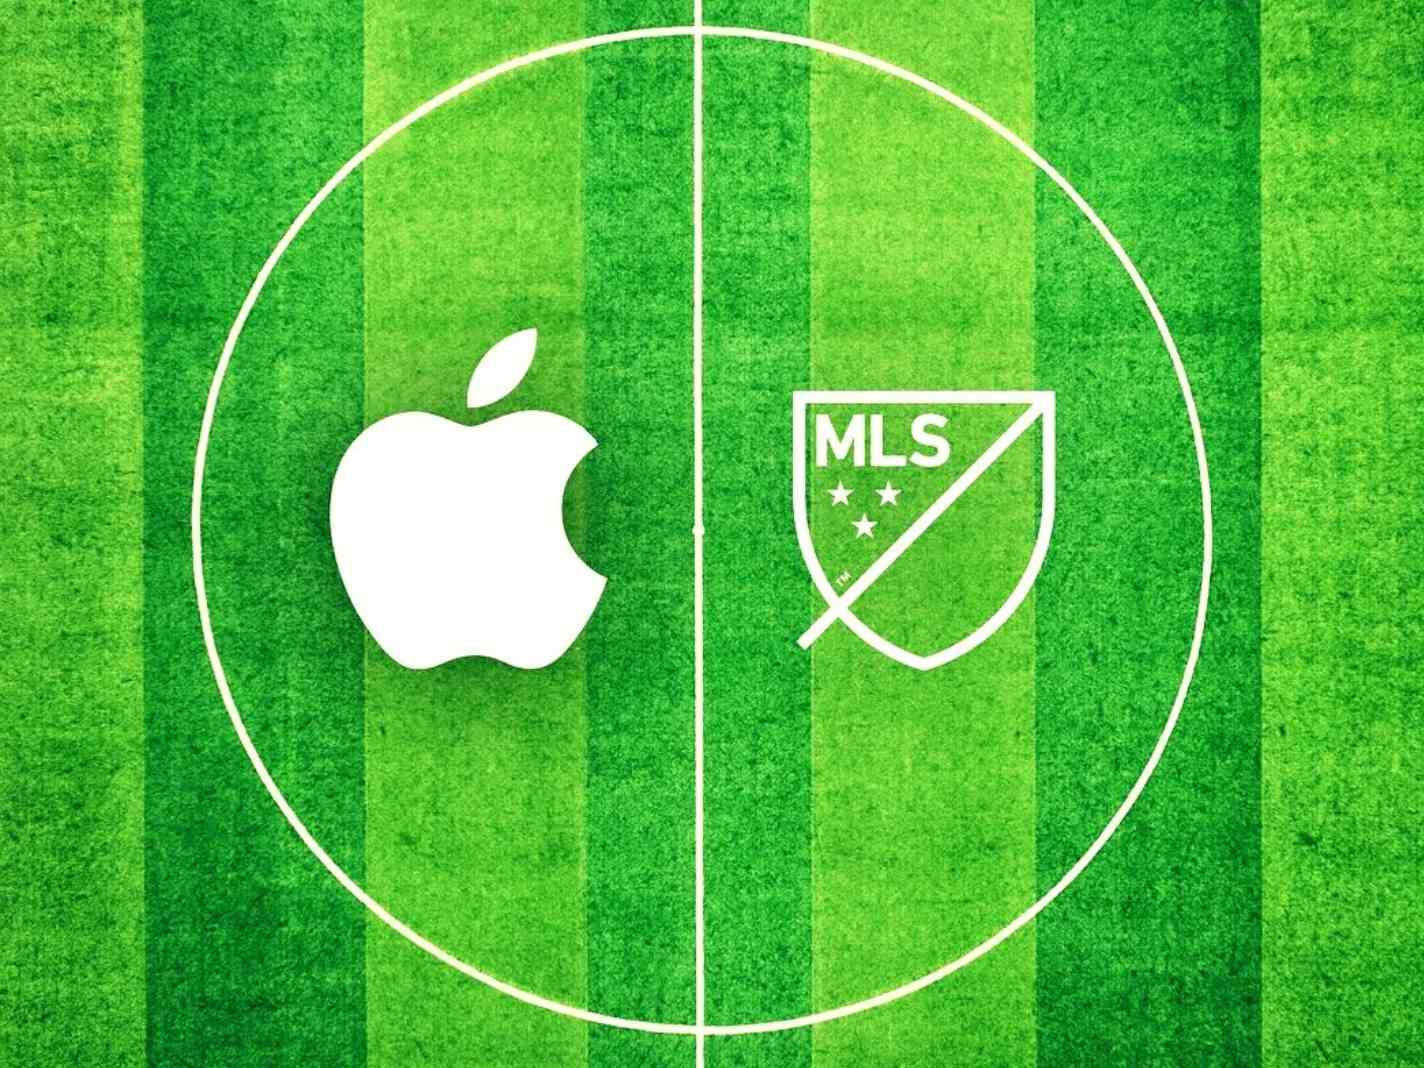 MLS has signed a new $2.5bn deal with tech giants Apple